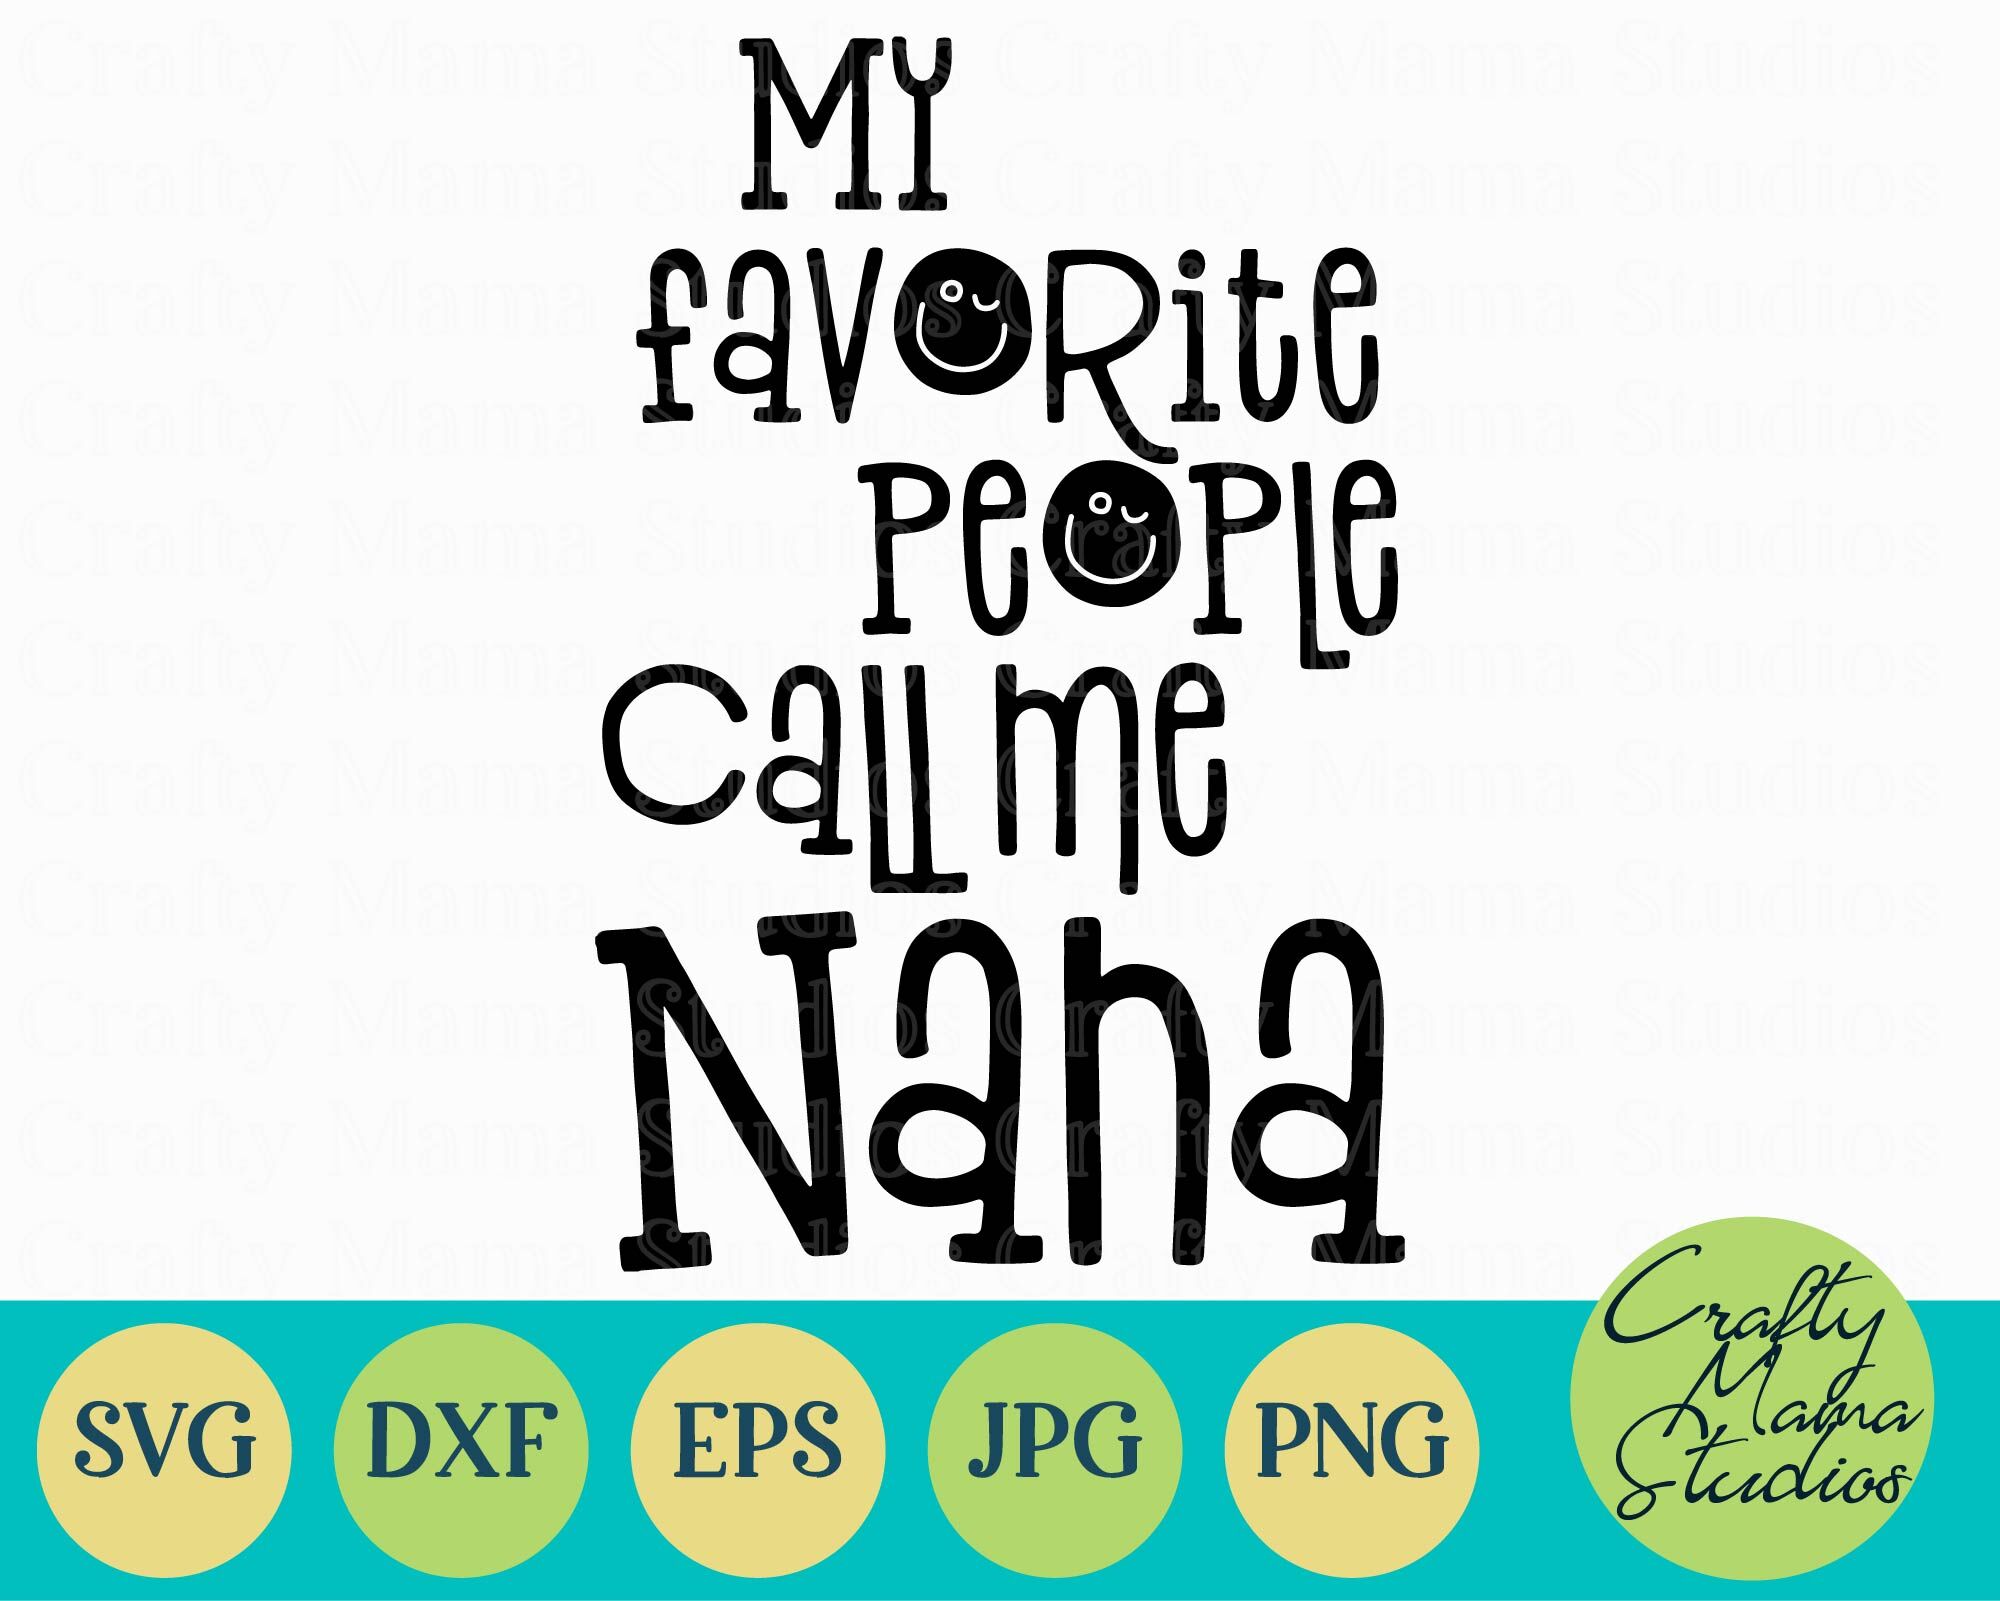 Free Free Mama&#039;s Favorite Human Svg 688 SVG PNG EPS DXF File